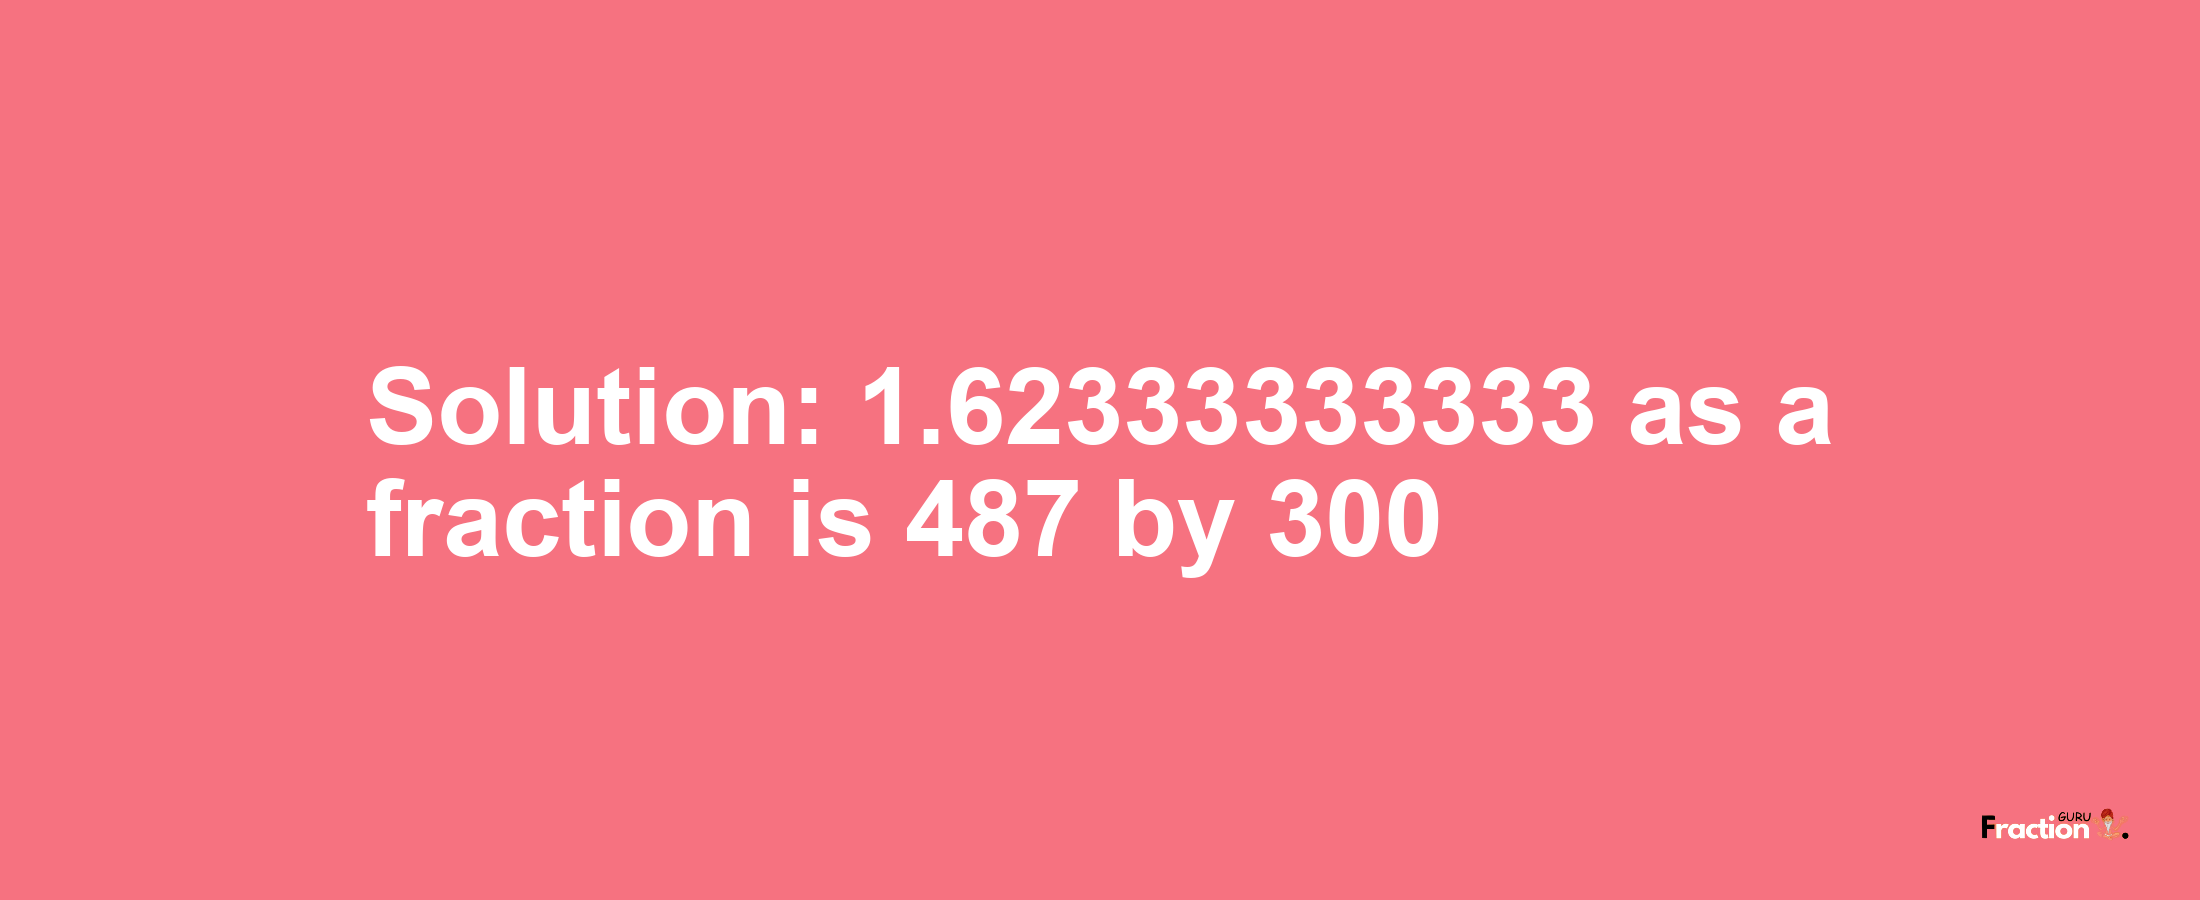 Solution:1.62333333333 as a fraction is 487/300